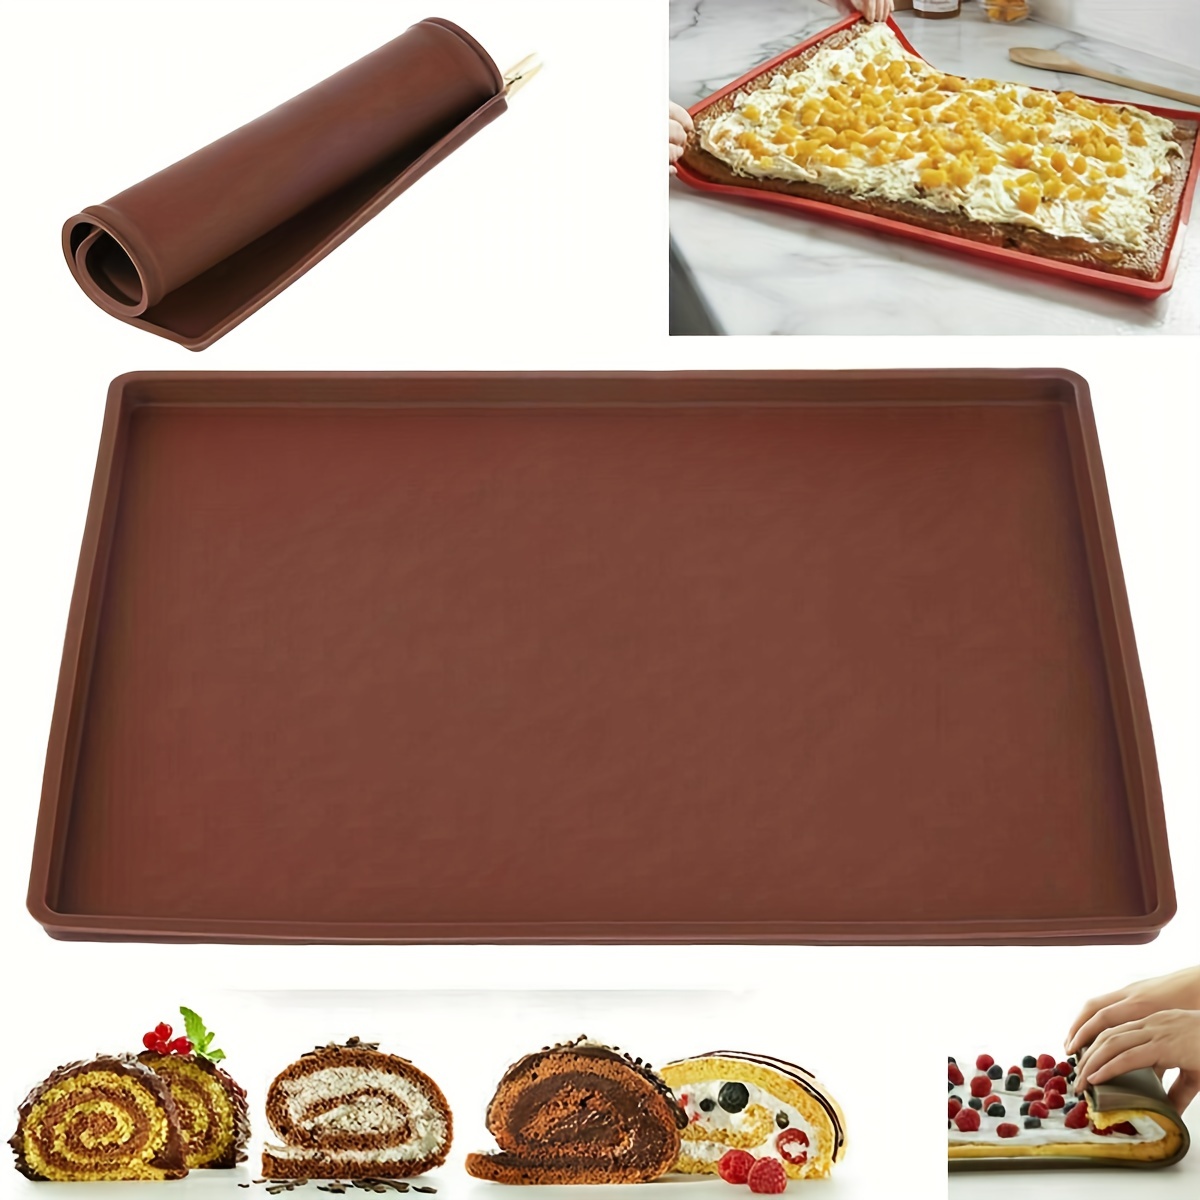 Square Silicone Baking Mats for 10 inch Cake Pan 9.65 inchSquare Food Grade Silicone Mat for Baking Sheet for Cake/Pastry/Toast/Pie Non-Stick Reusable